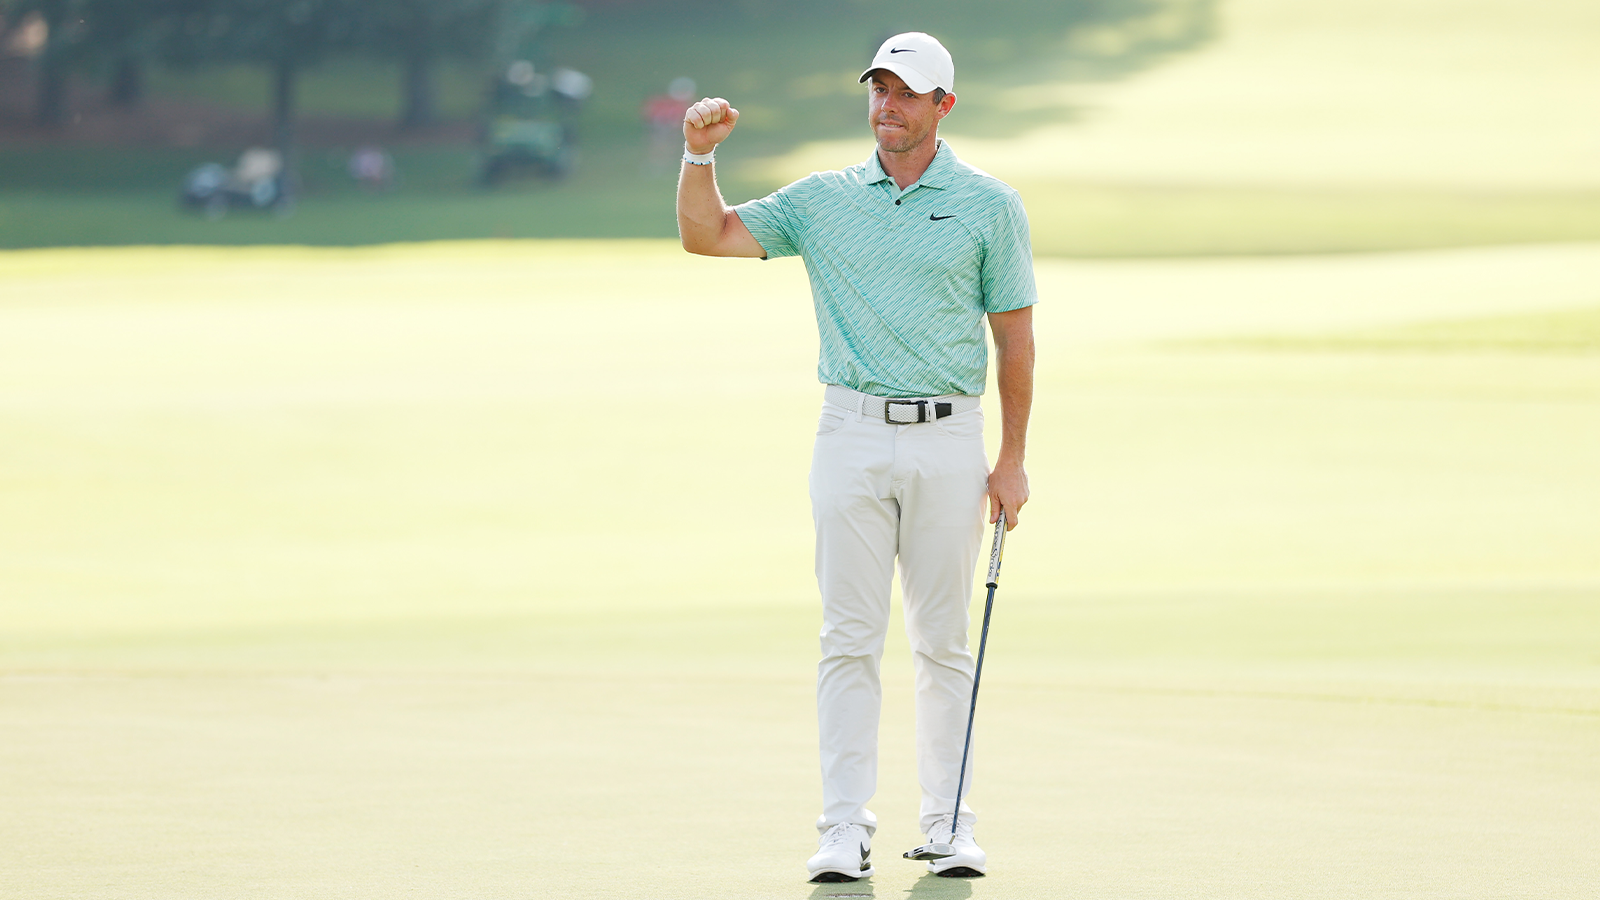 Rory McIlroy of Northern Ireland celebrates on the 18th green after winning during the final round of the TOUR Championship at East Lake Golf Club on August 28, 2022 in Atlanta, Georgia. (Photo by Cliff Hawkins/Getty Images)